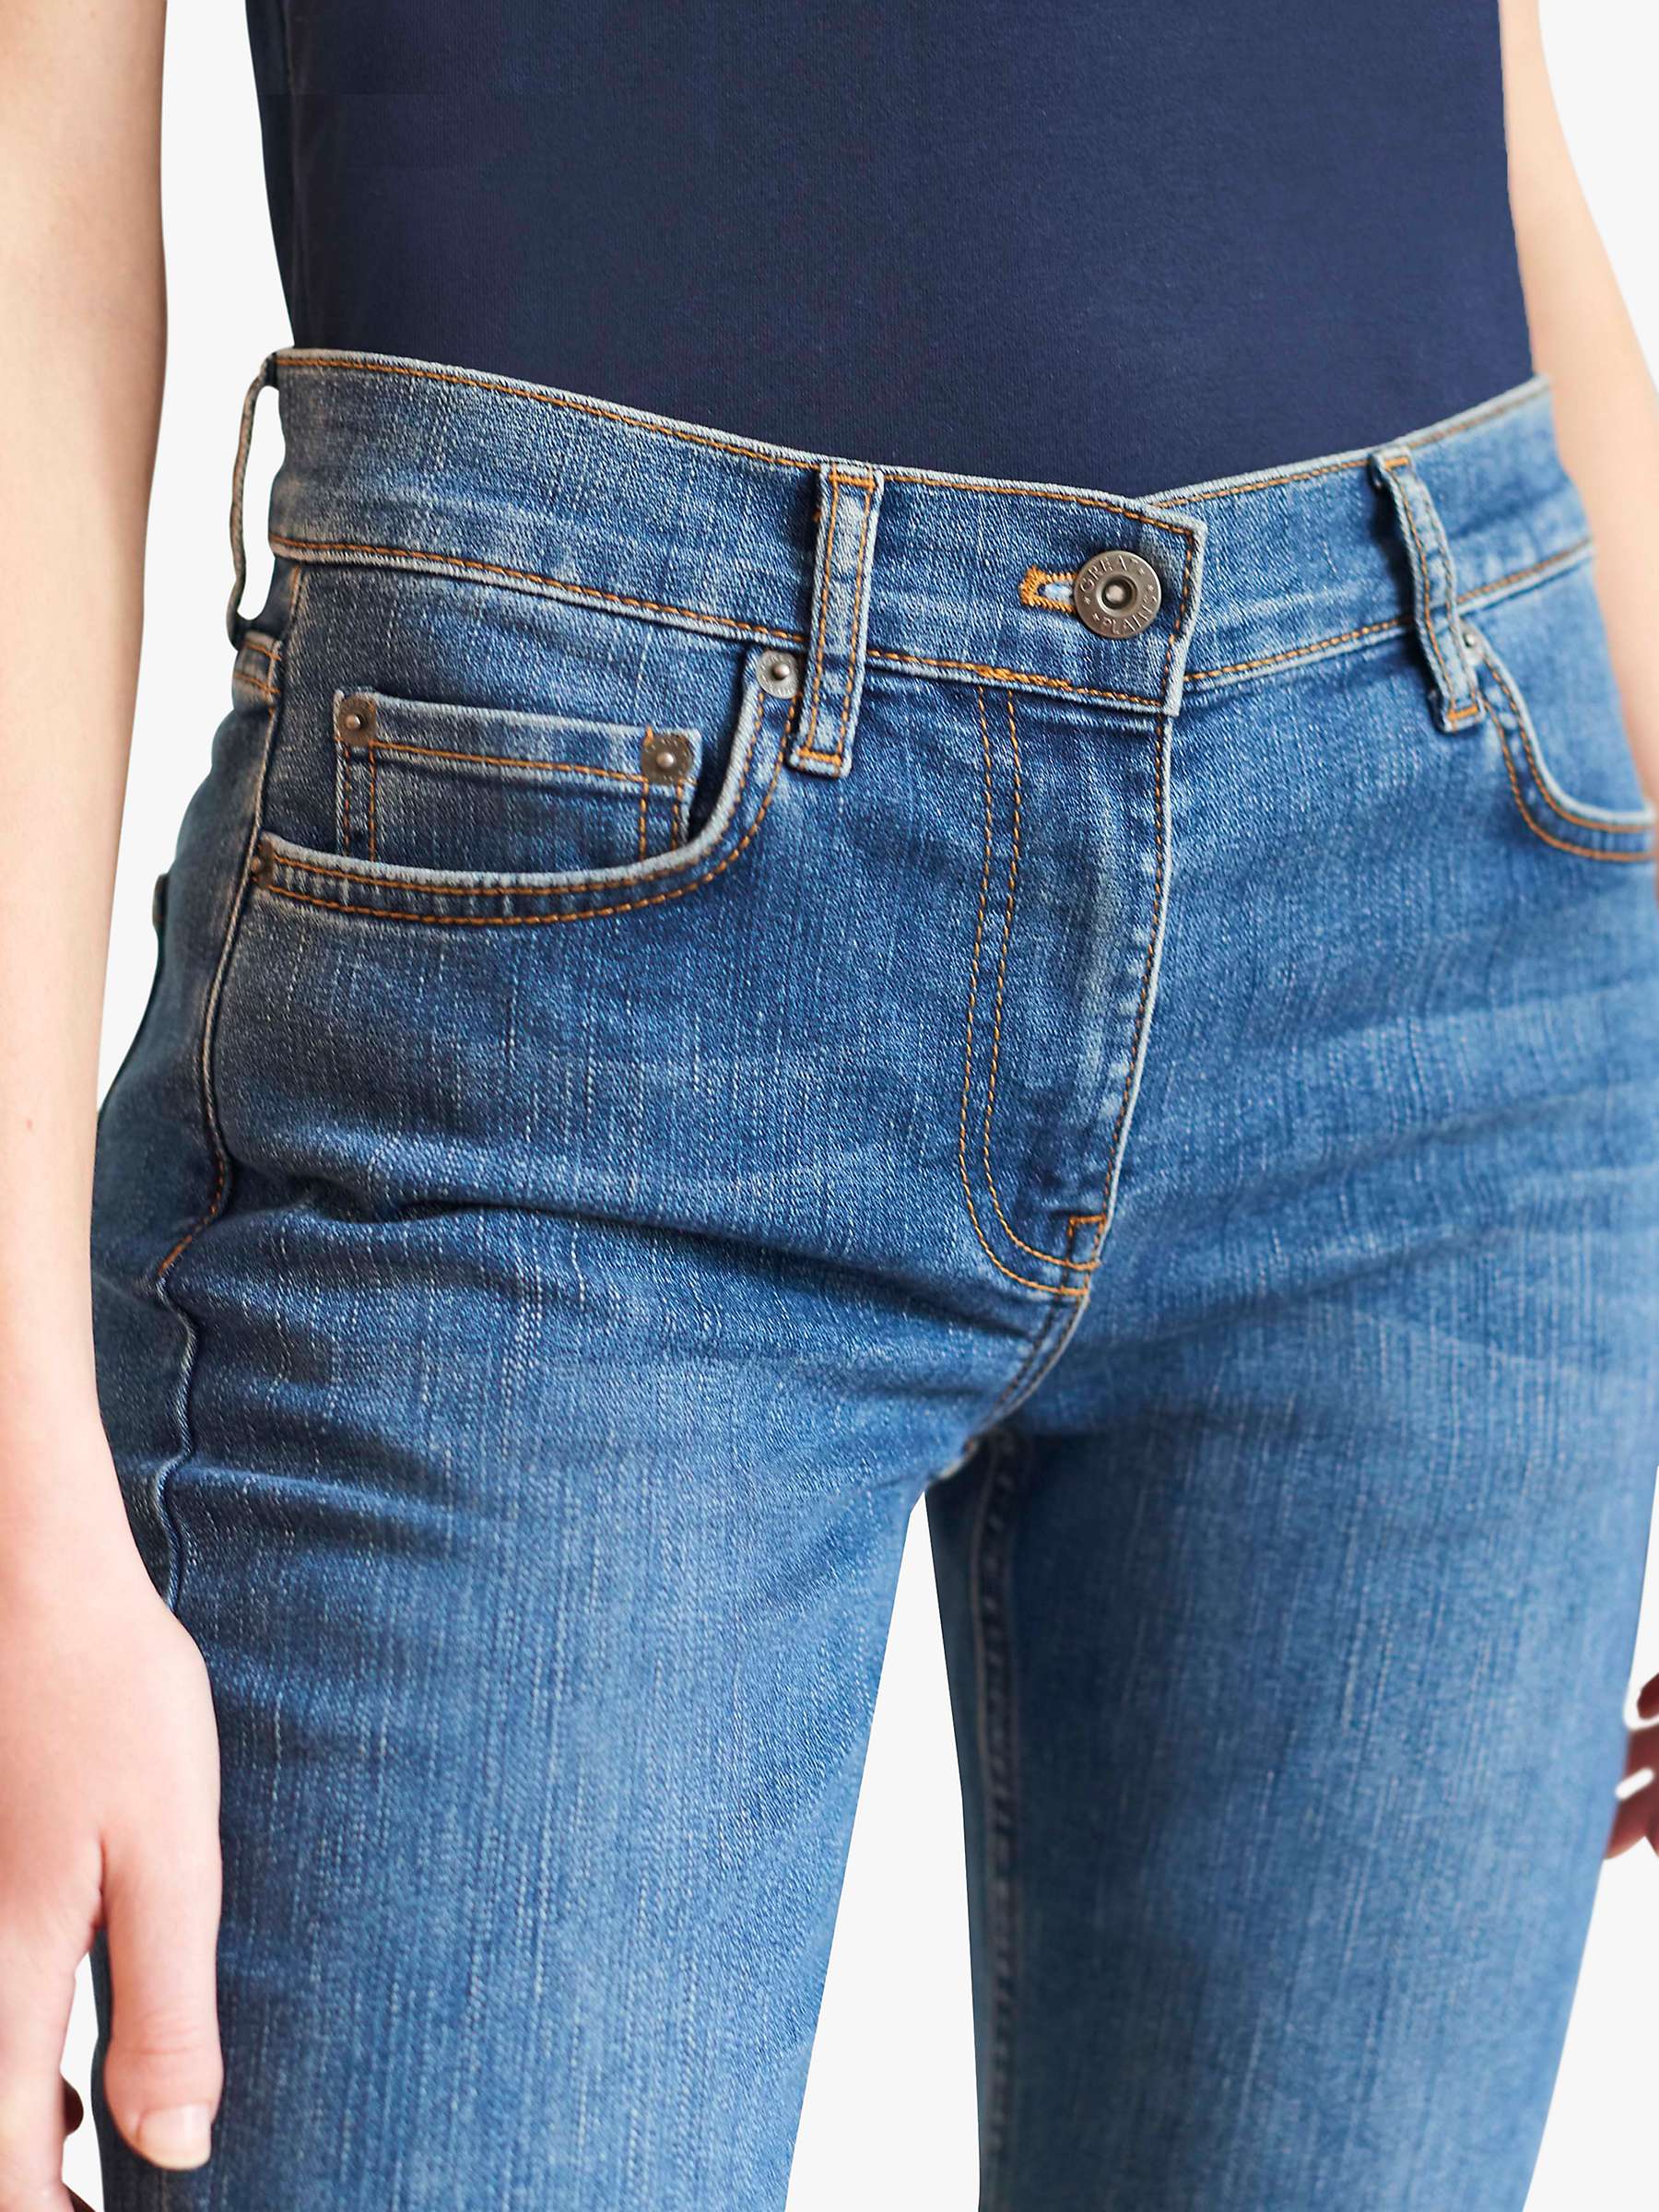 Buy Great Plains Classic Bootcut Jeans Online at johnlewis.com